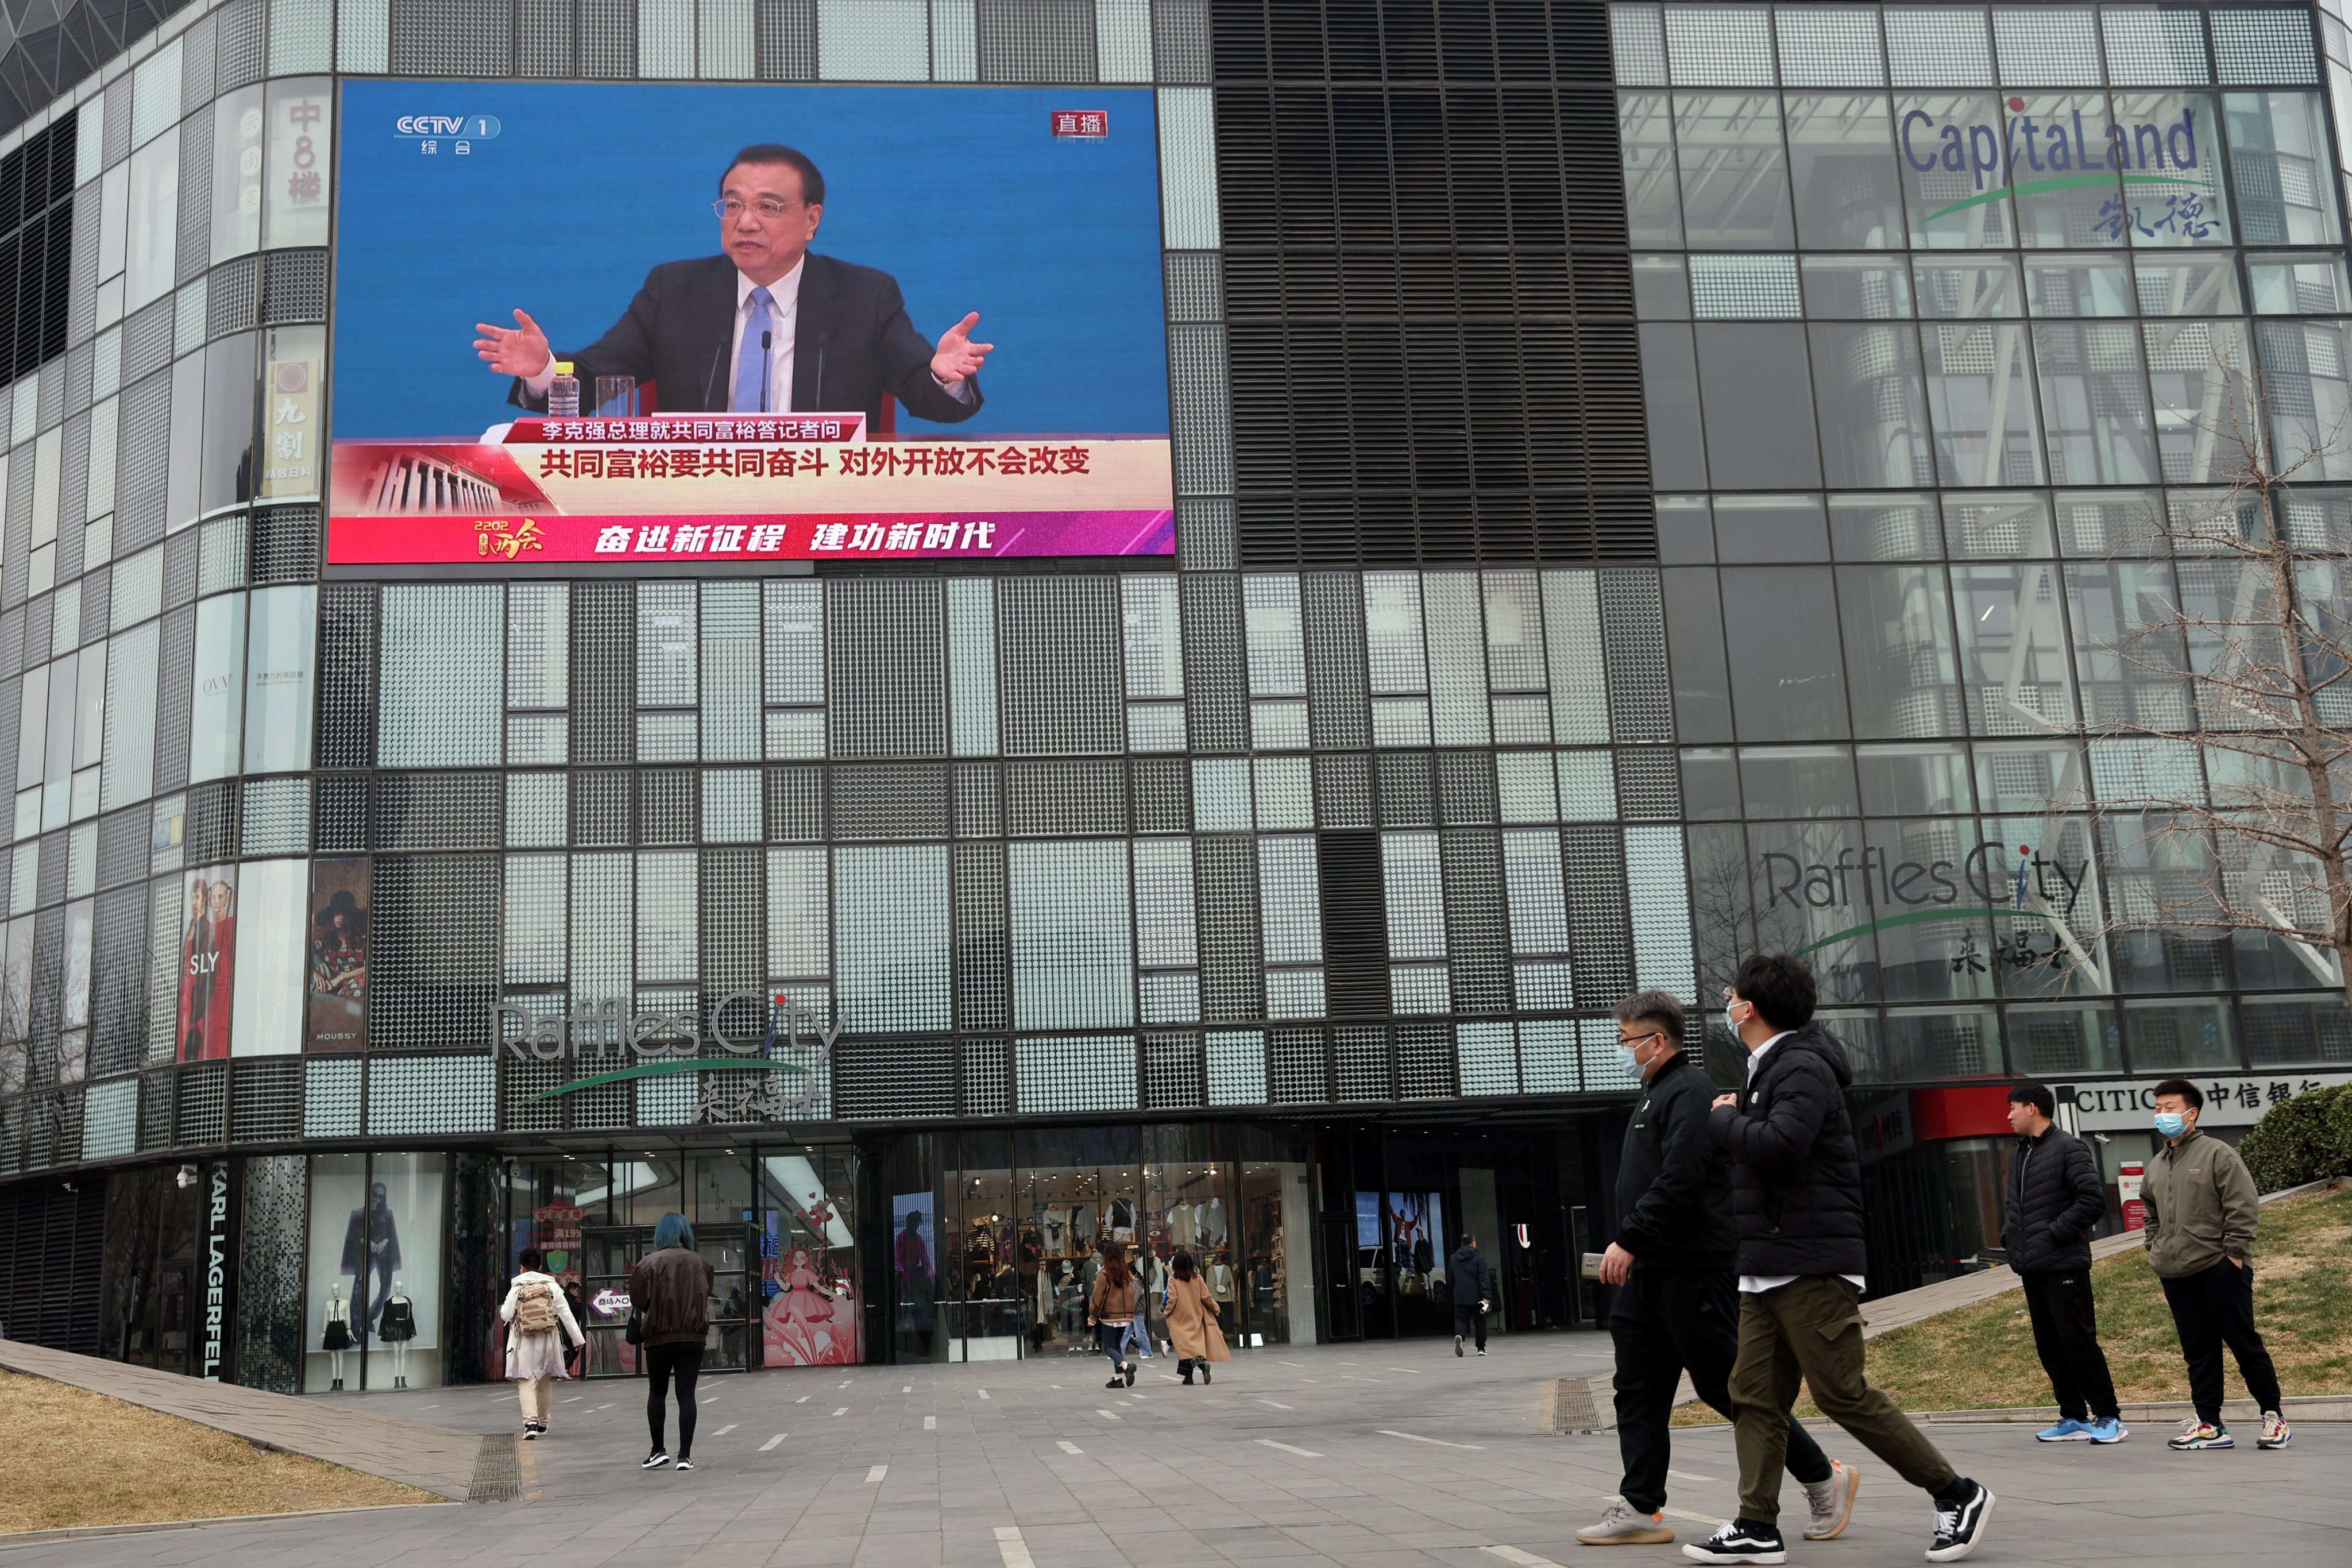 People walk past a screen showing Premier Li Keqiang giving a news conference to close the Two Sessions in Beijing, on March 11. Photo: Reuters